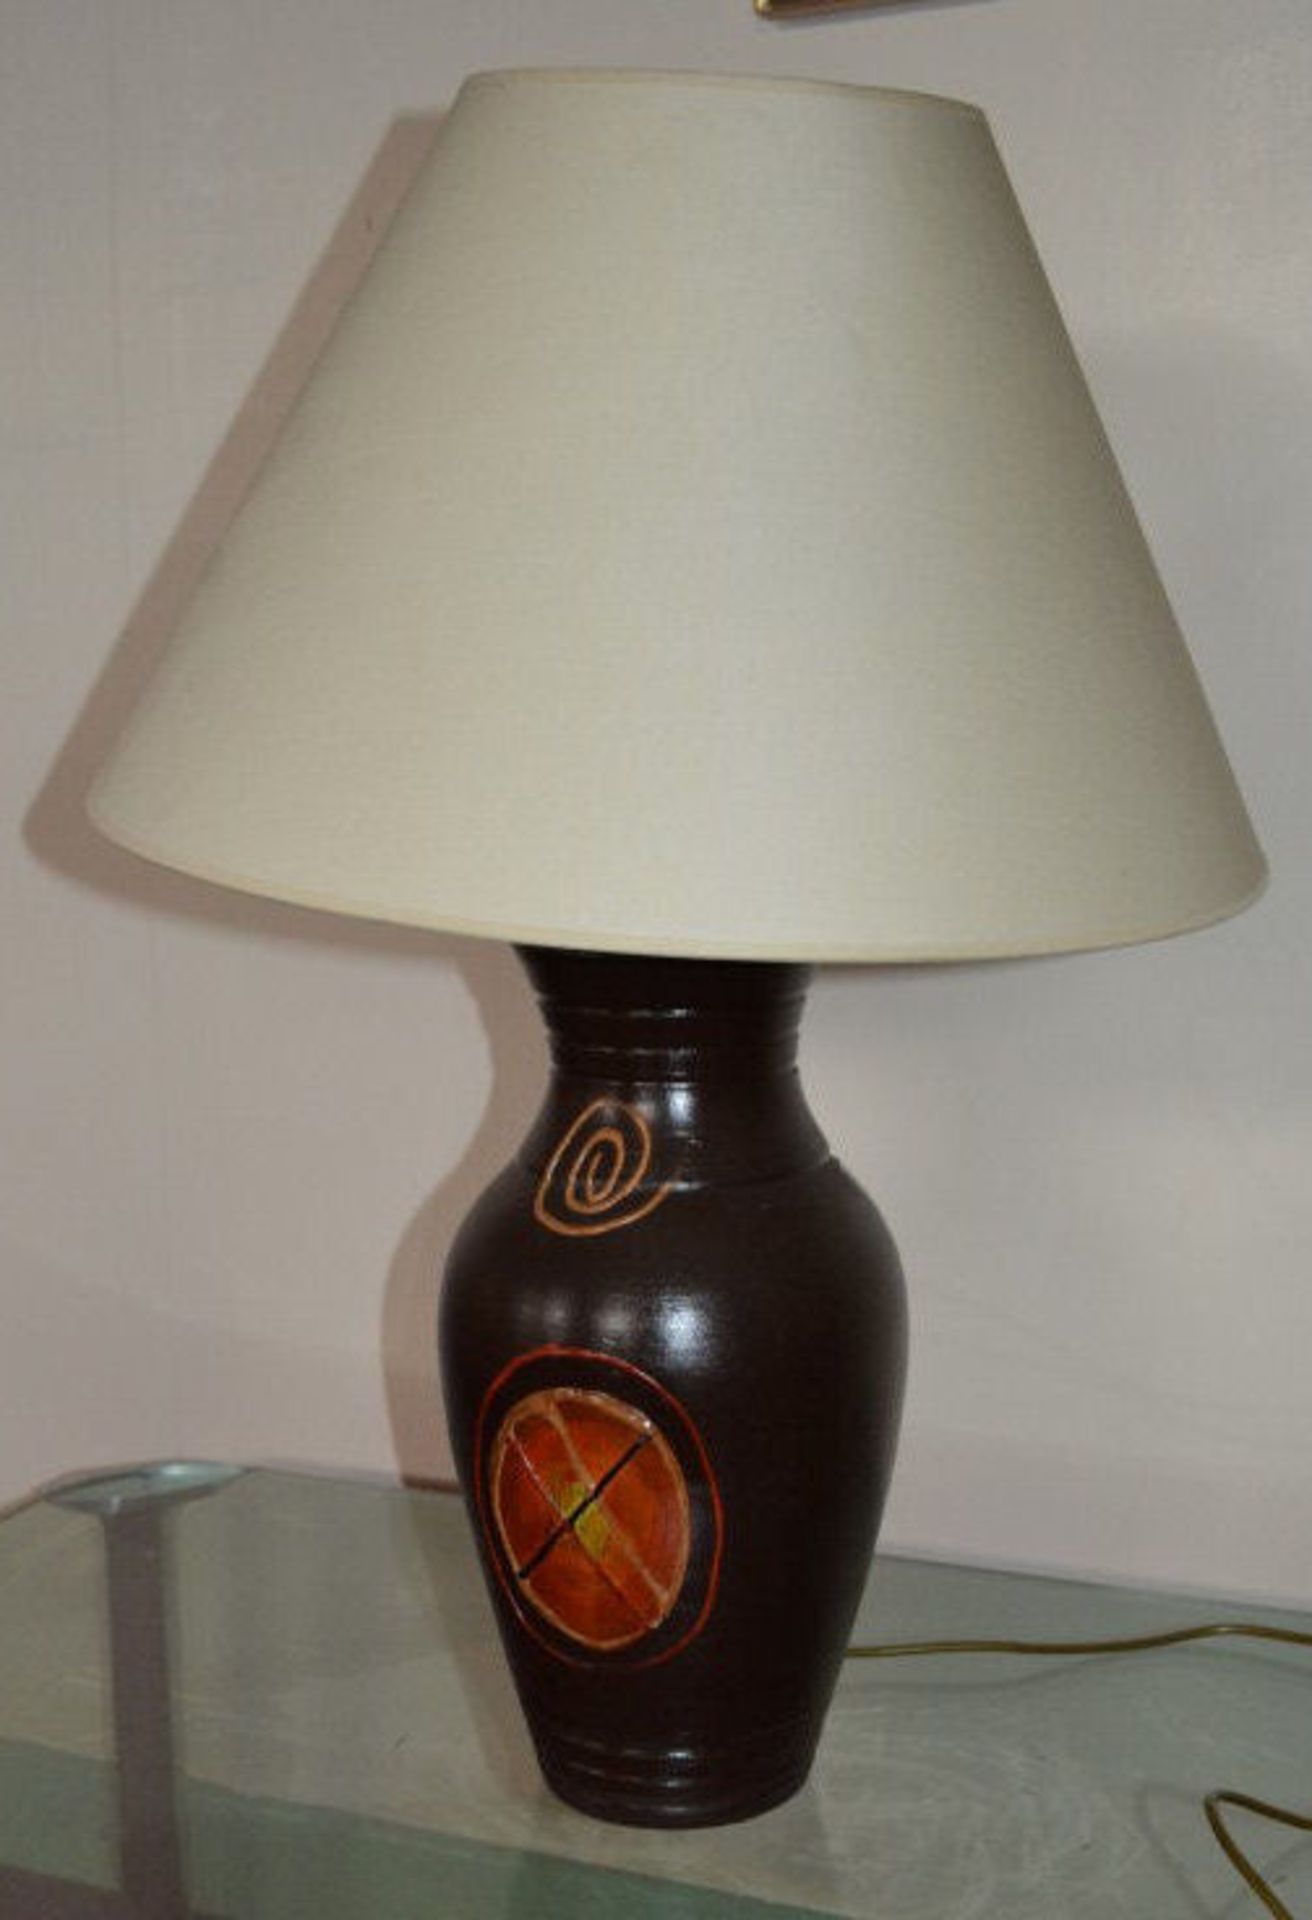 1 x Dark Brown Lamp With Cream Lampshade. Height 74cm To Top Of Lampshade. Lampshade Is 30cm Tall.